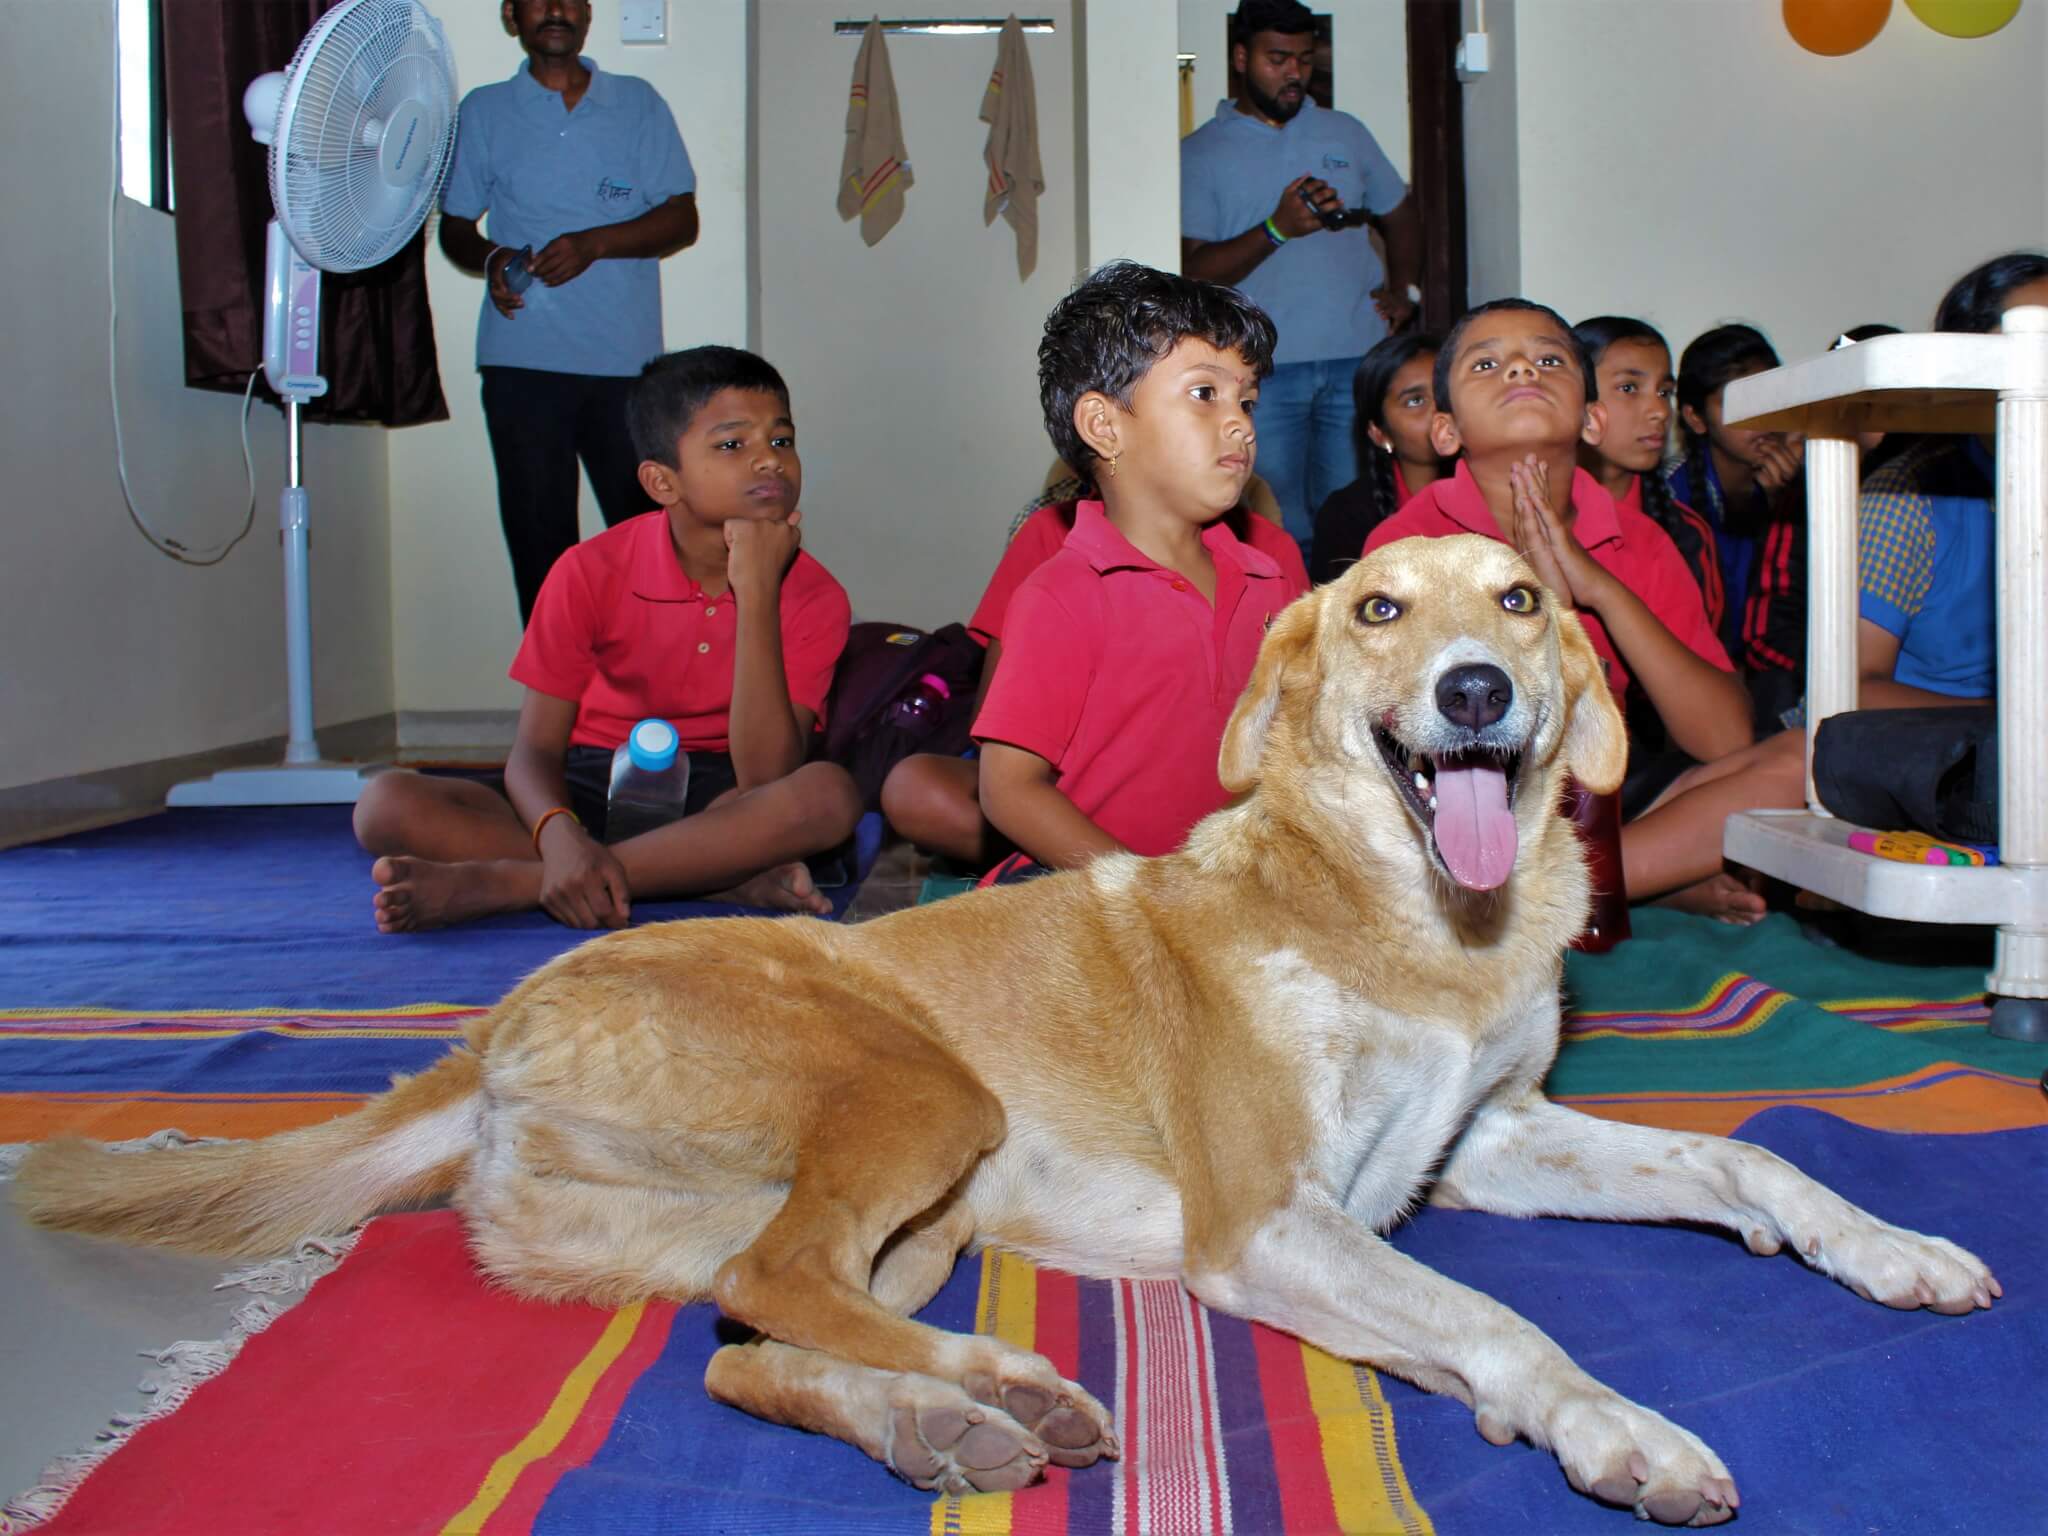 A dog smiles so wide that her tongue hangs out of her mouth as she lies on the classroom floor in front of a group of schoolchildren.